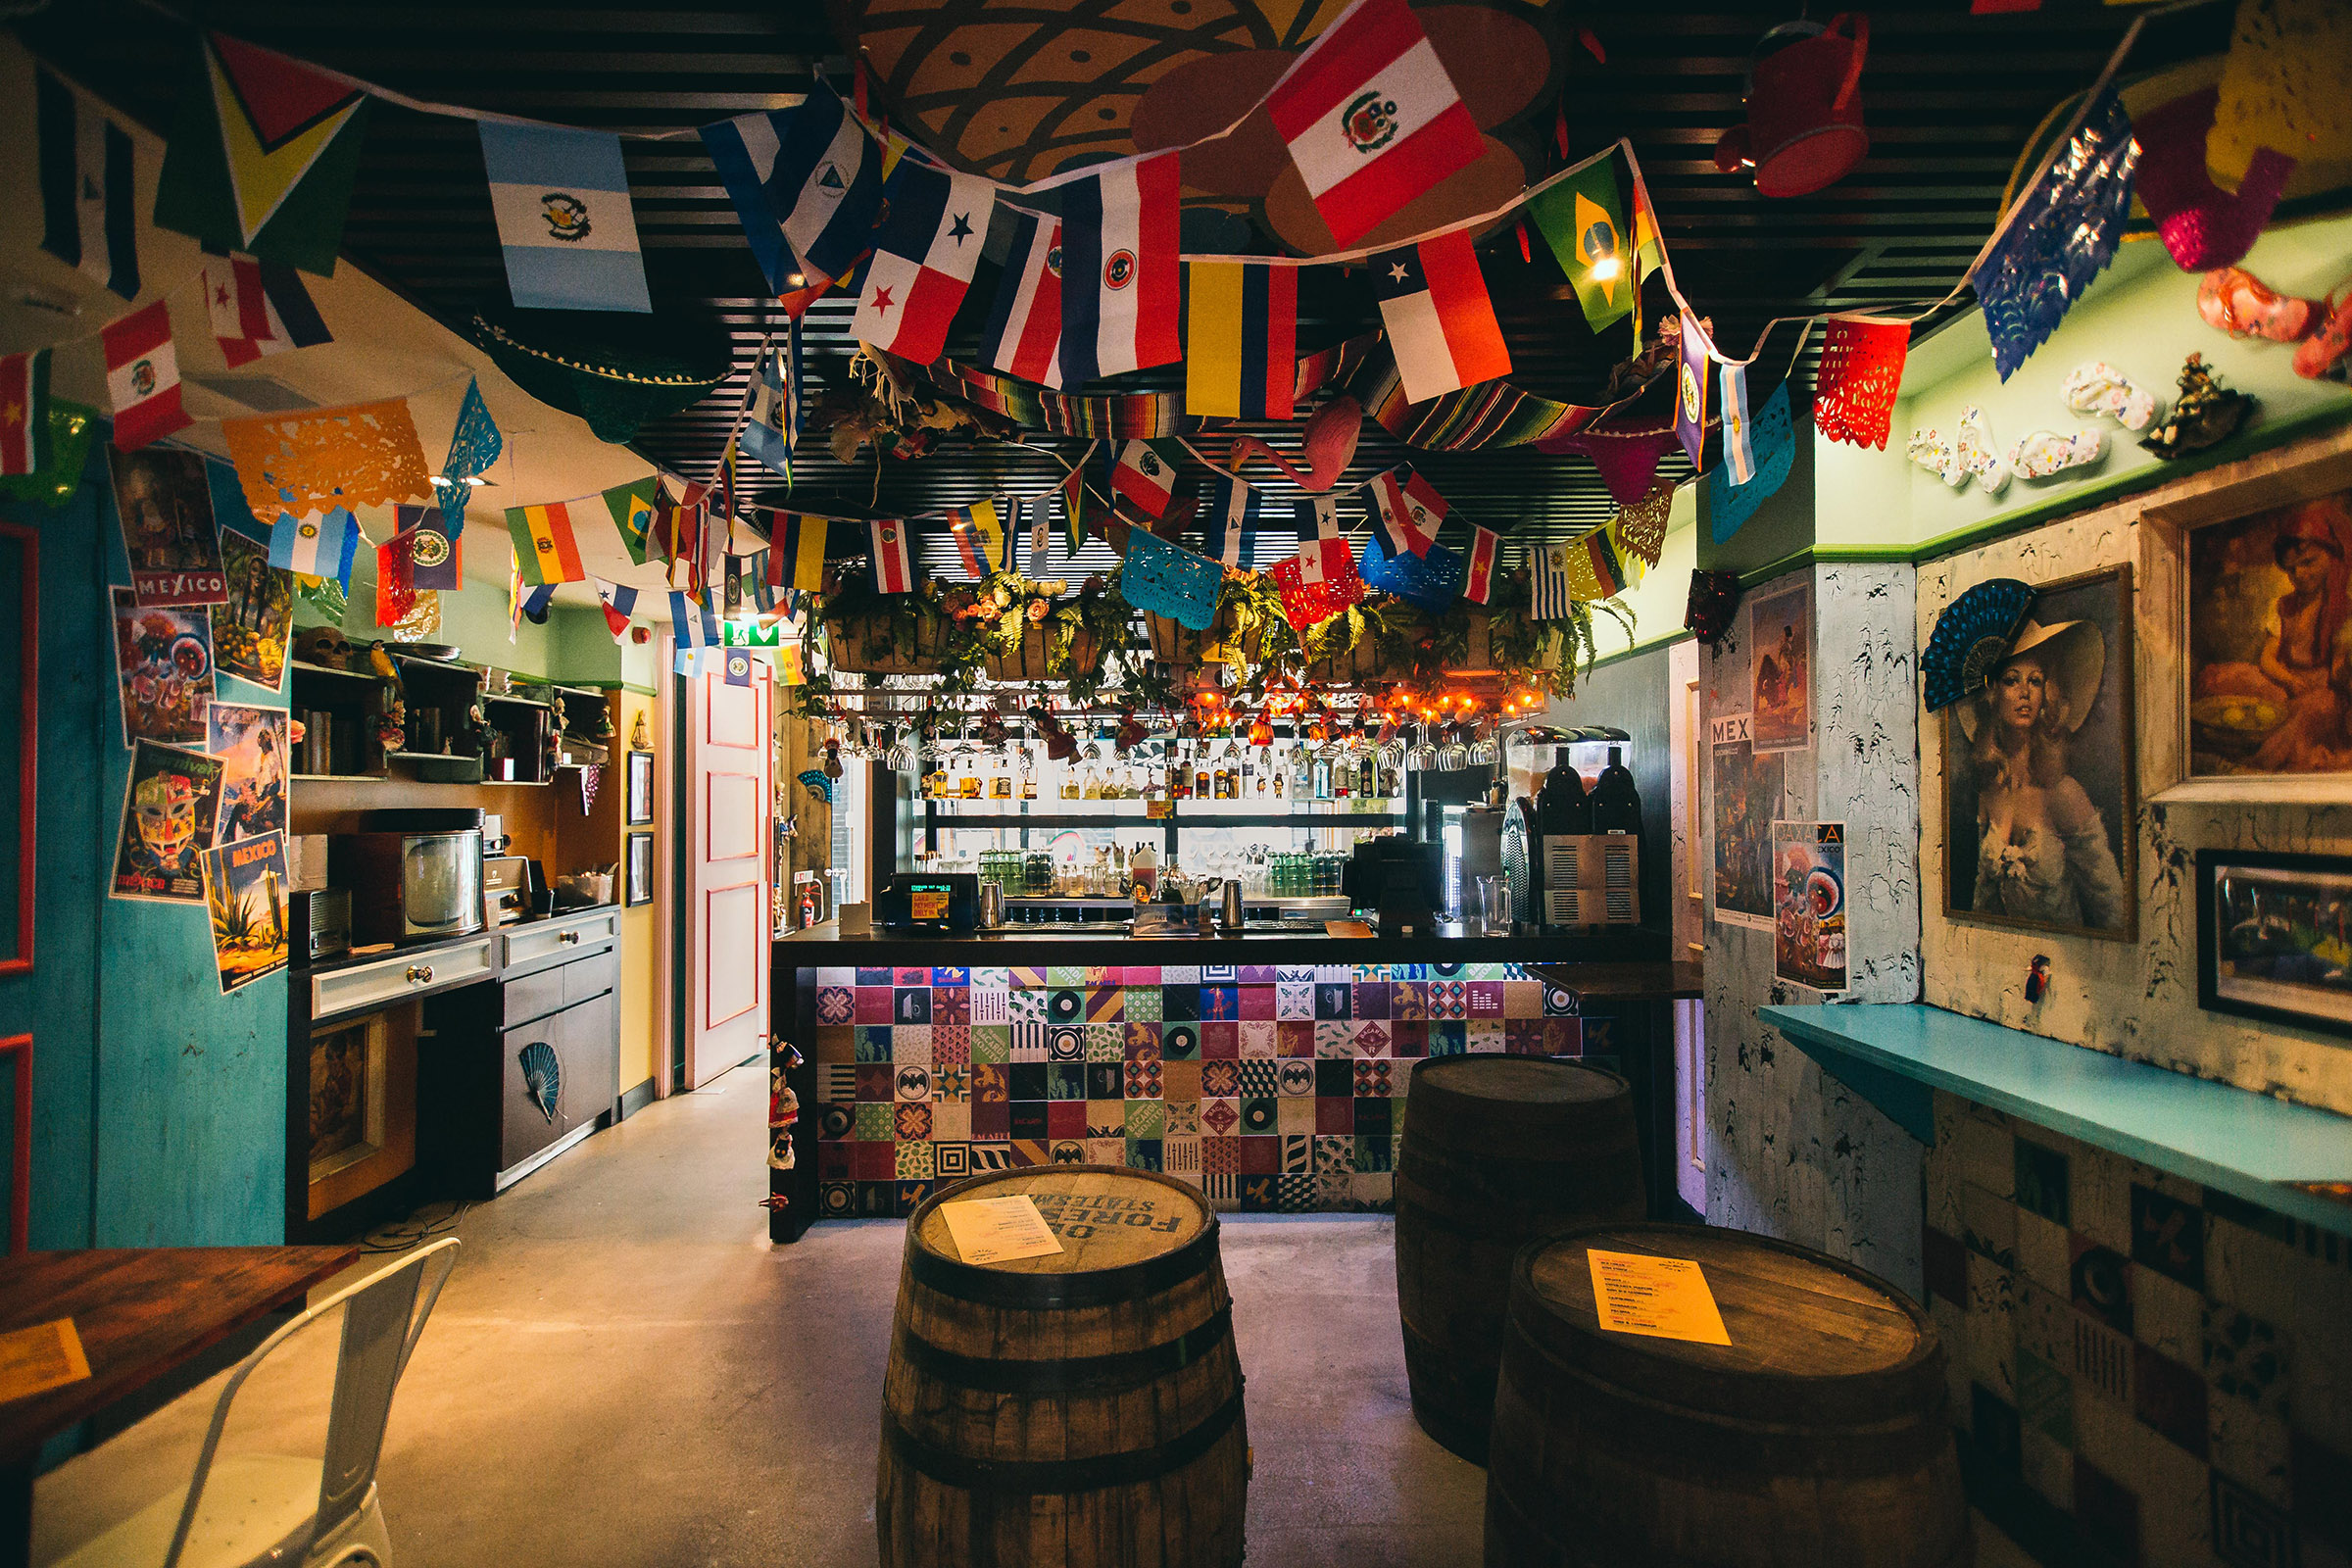 Casa Bonita pop-up bar in London. Eclectic interior with hanging flags and coloured walls designed by CT Creative